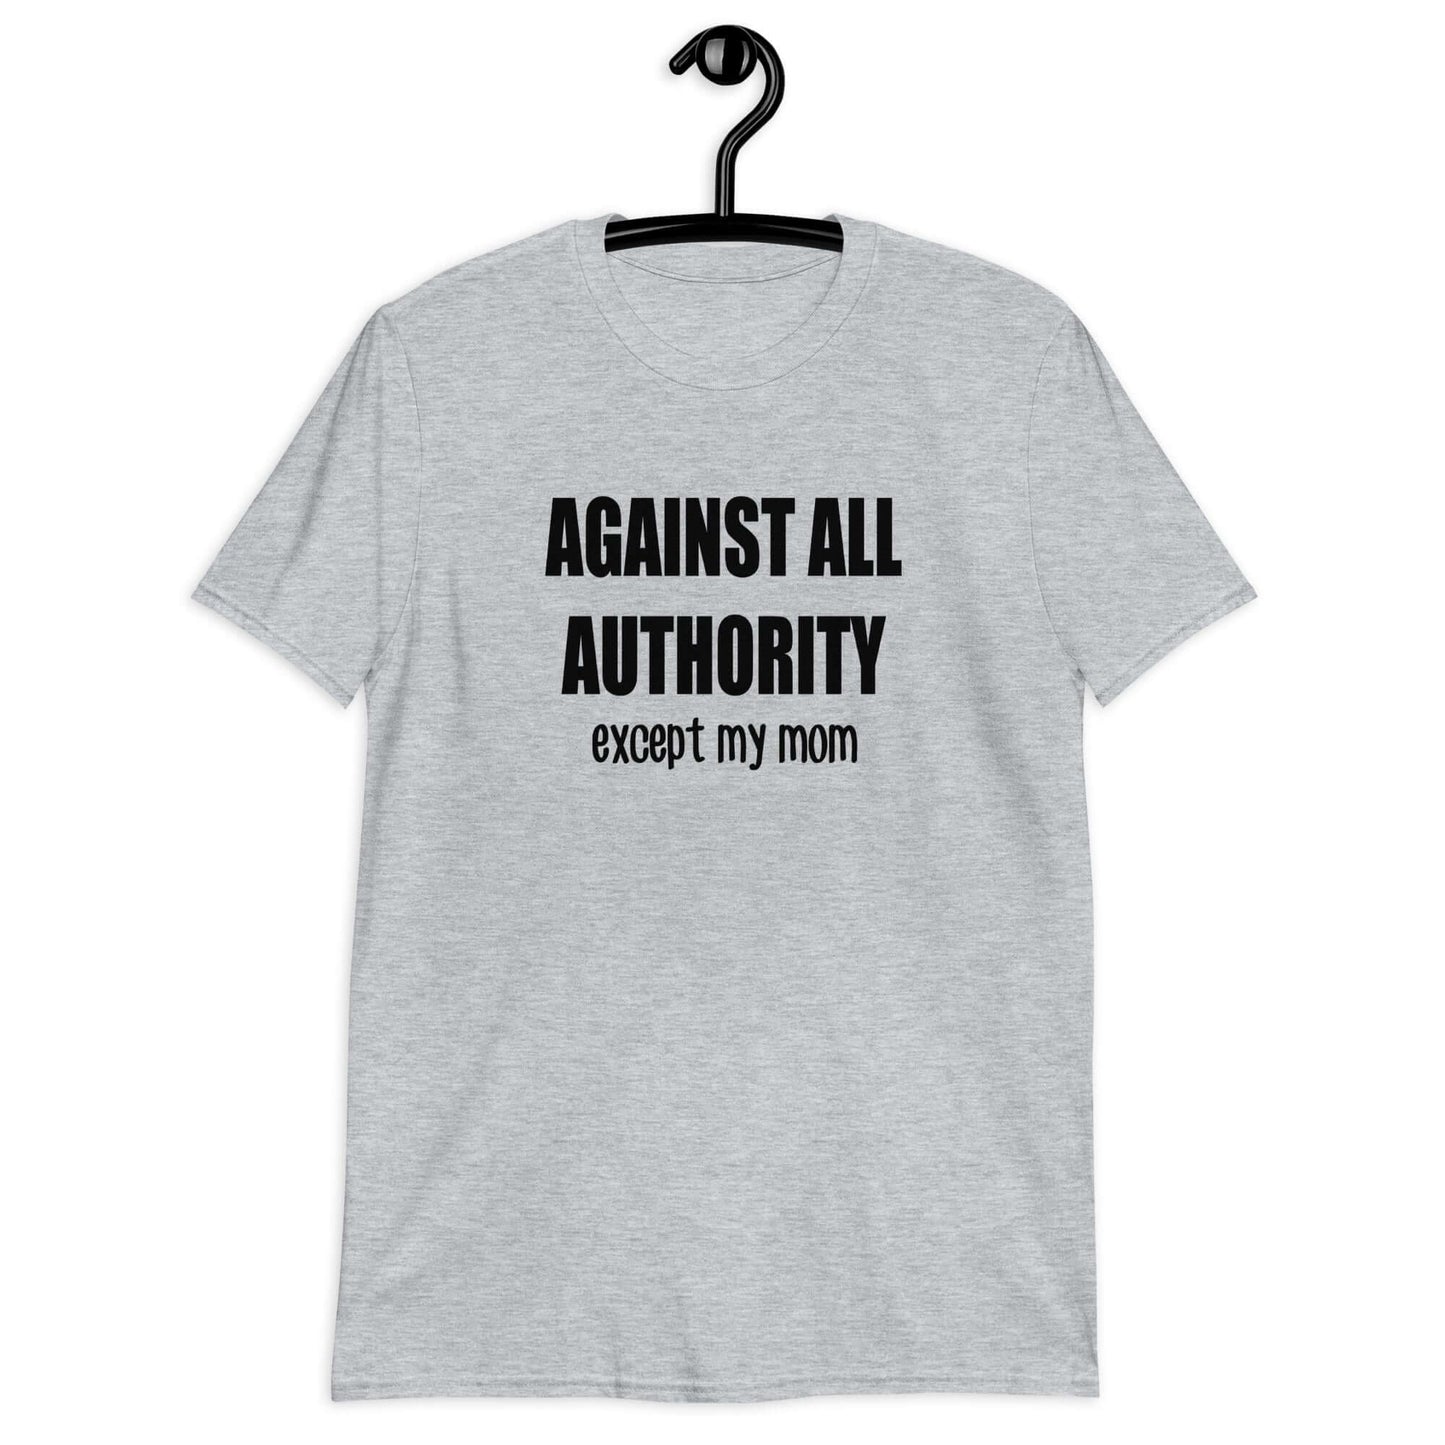 sport grey Against all authority except my mom unisex T-Shirt